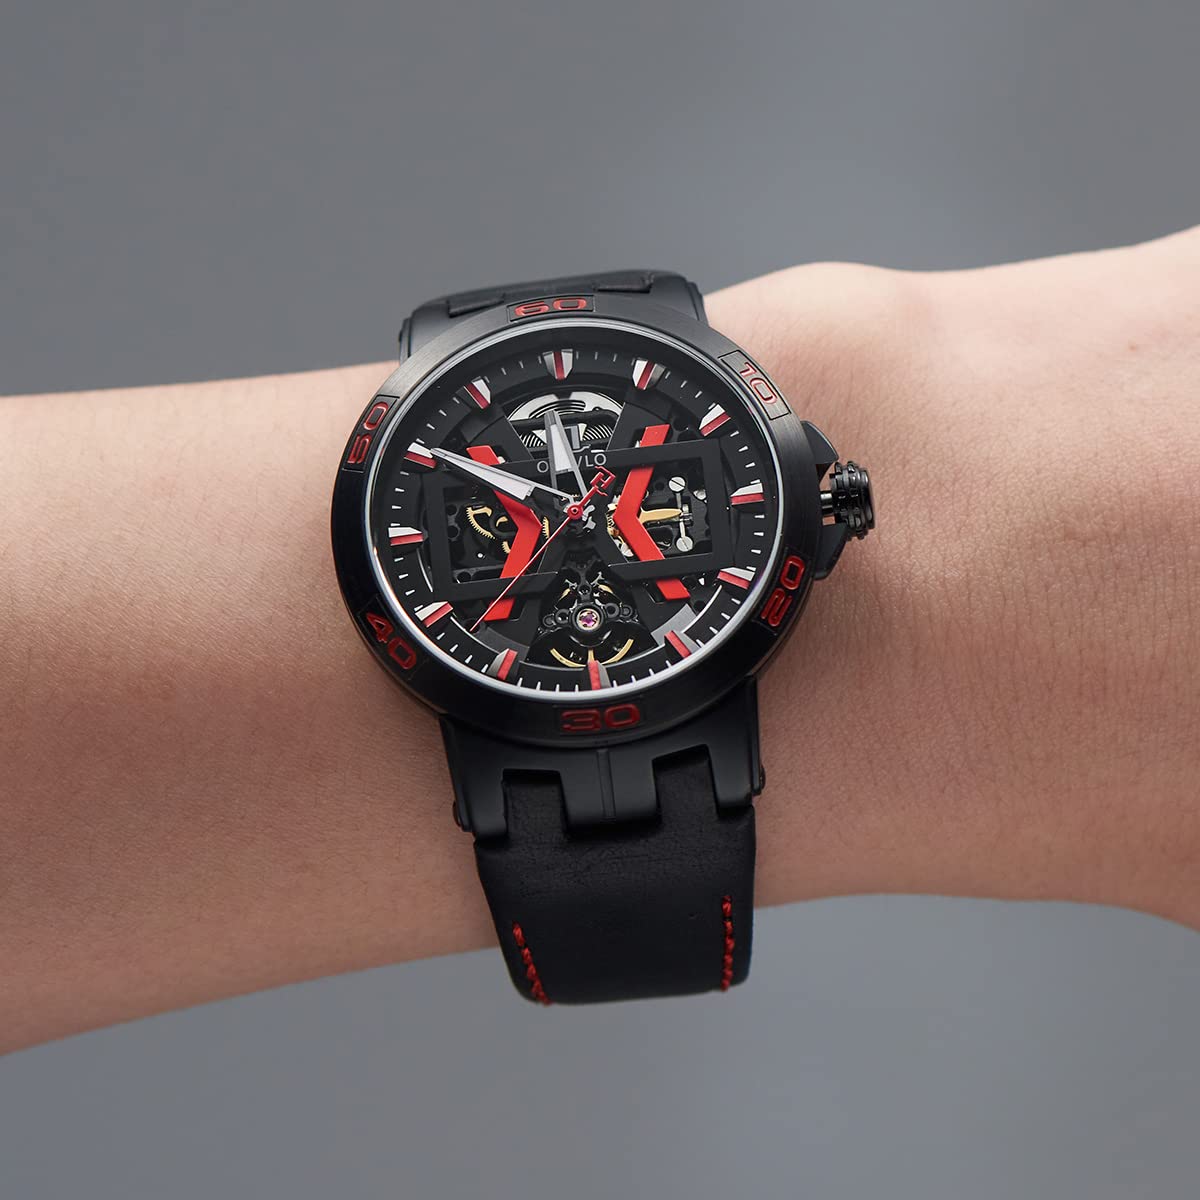 OBLVLO Design Black Skeleton Automatic Watches for Men Leather Strap Waterproof Military Watch Crazy Horse Leather Strap UM